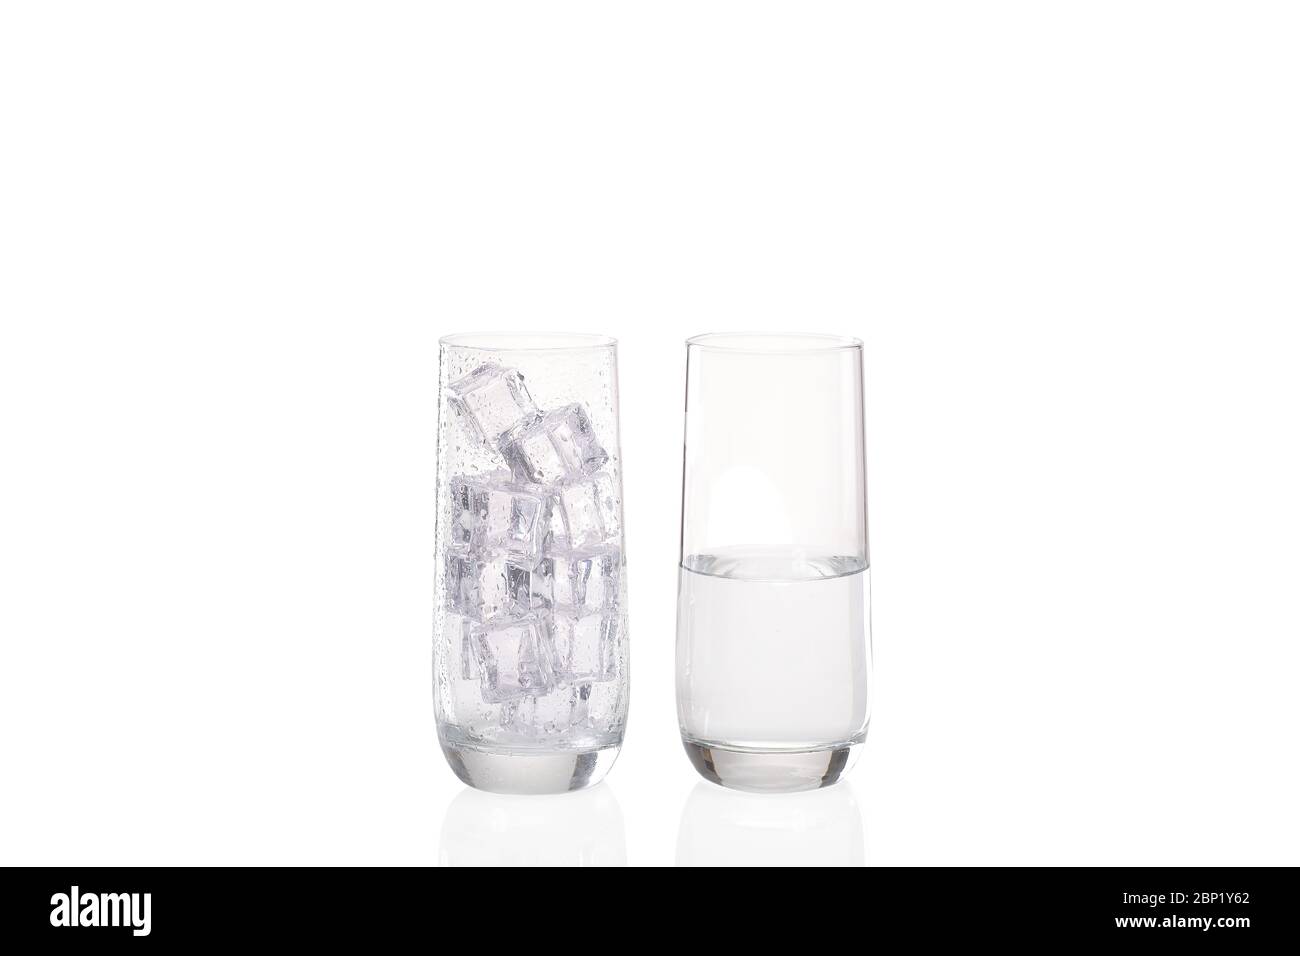 Ice melting concept with one glass with condensation droplets on the outside and full of ice and a second image of another glass half full of water sh Stock Photo